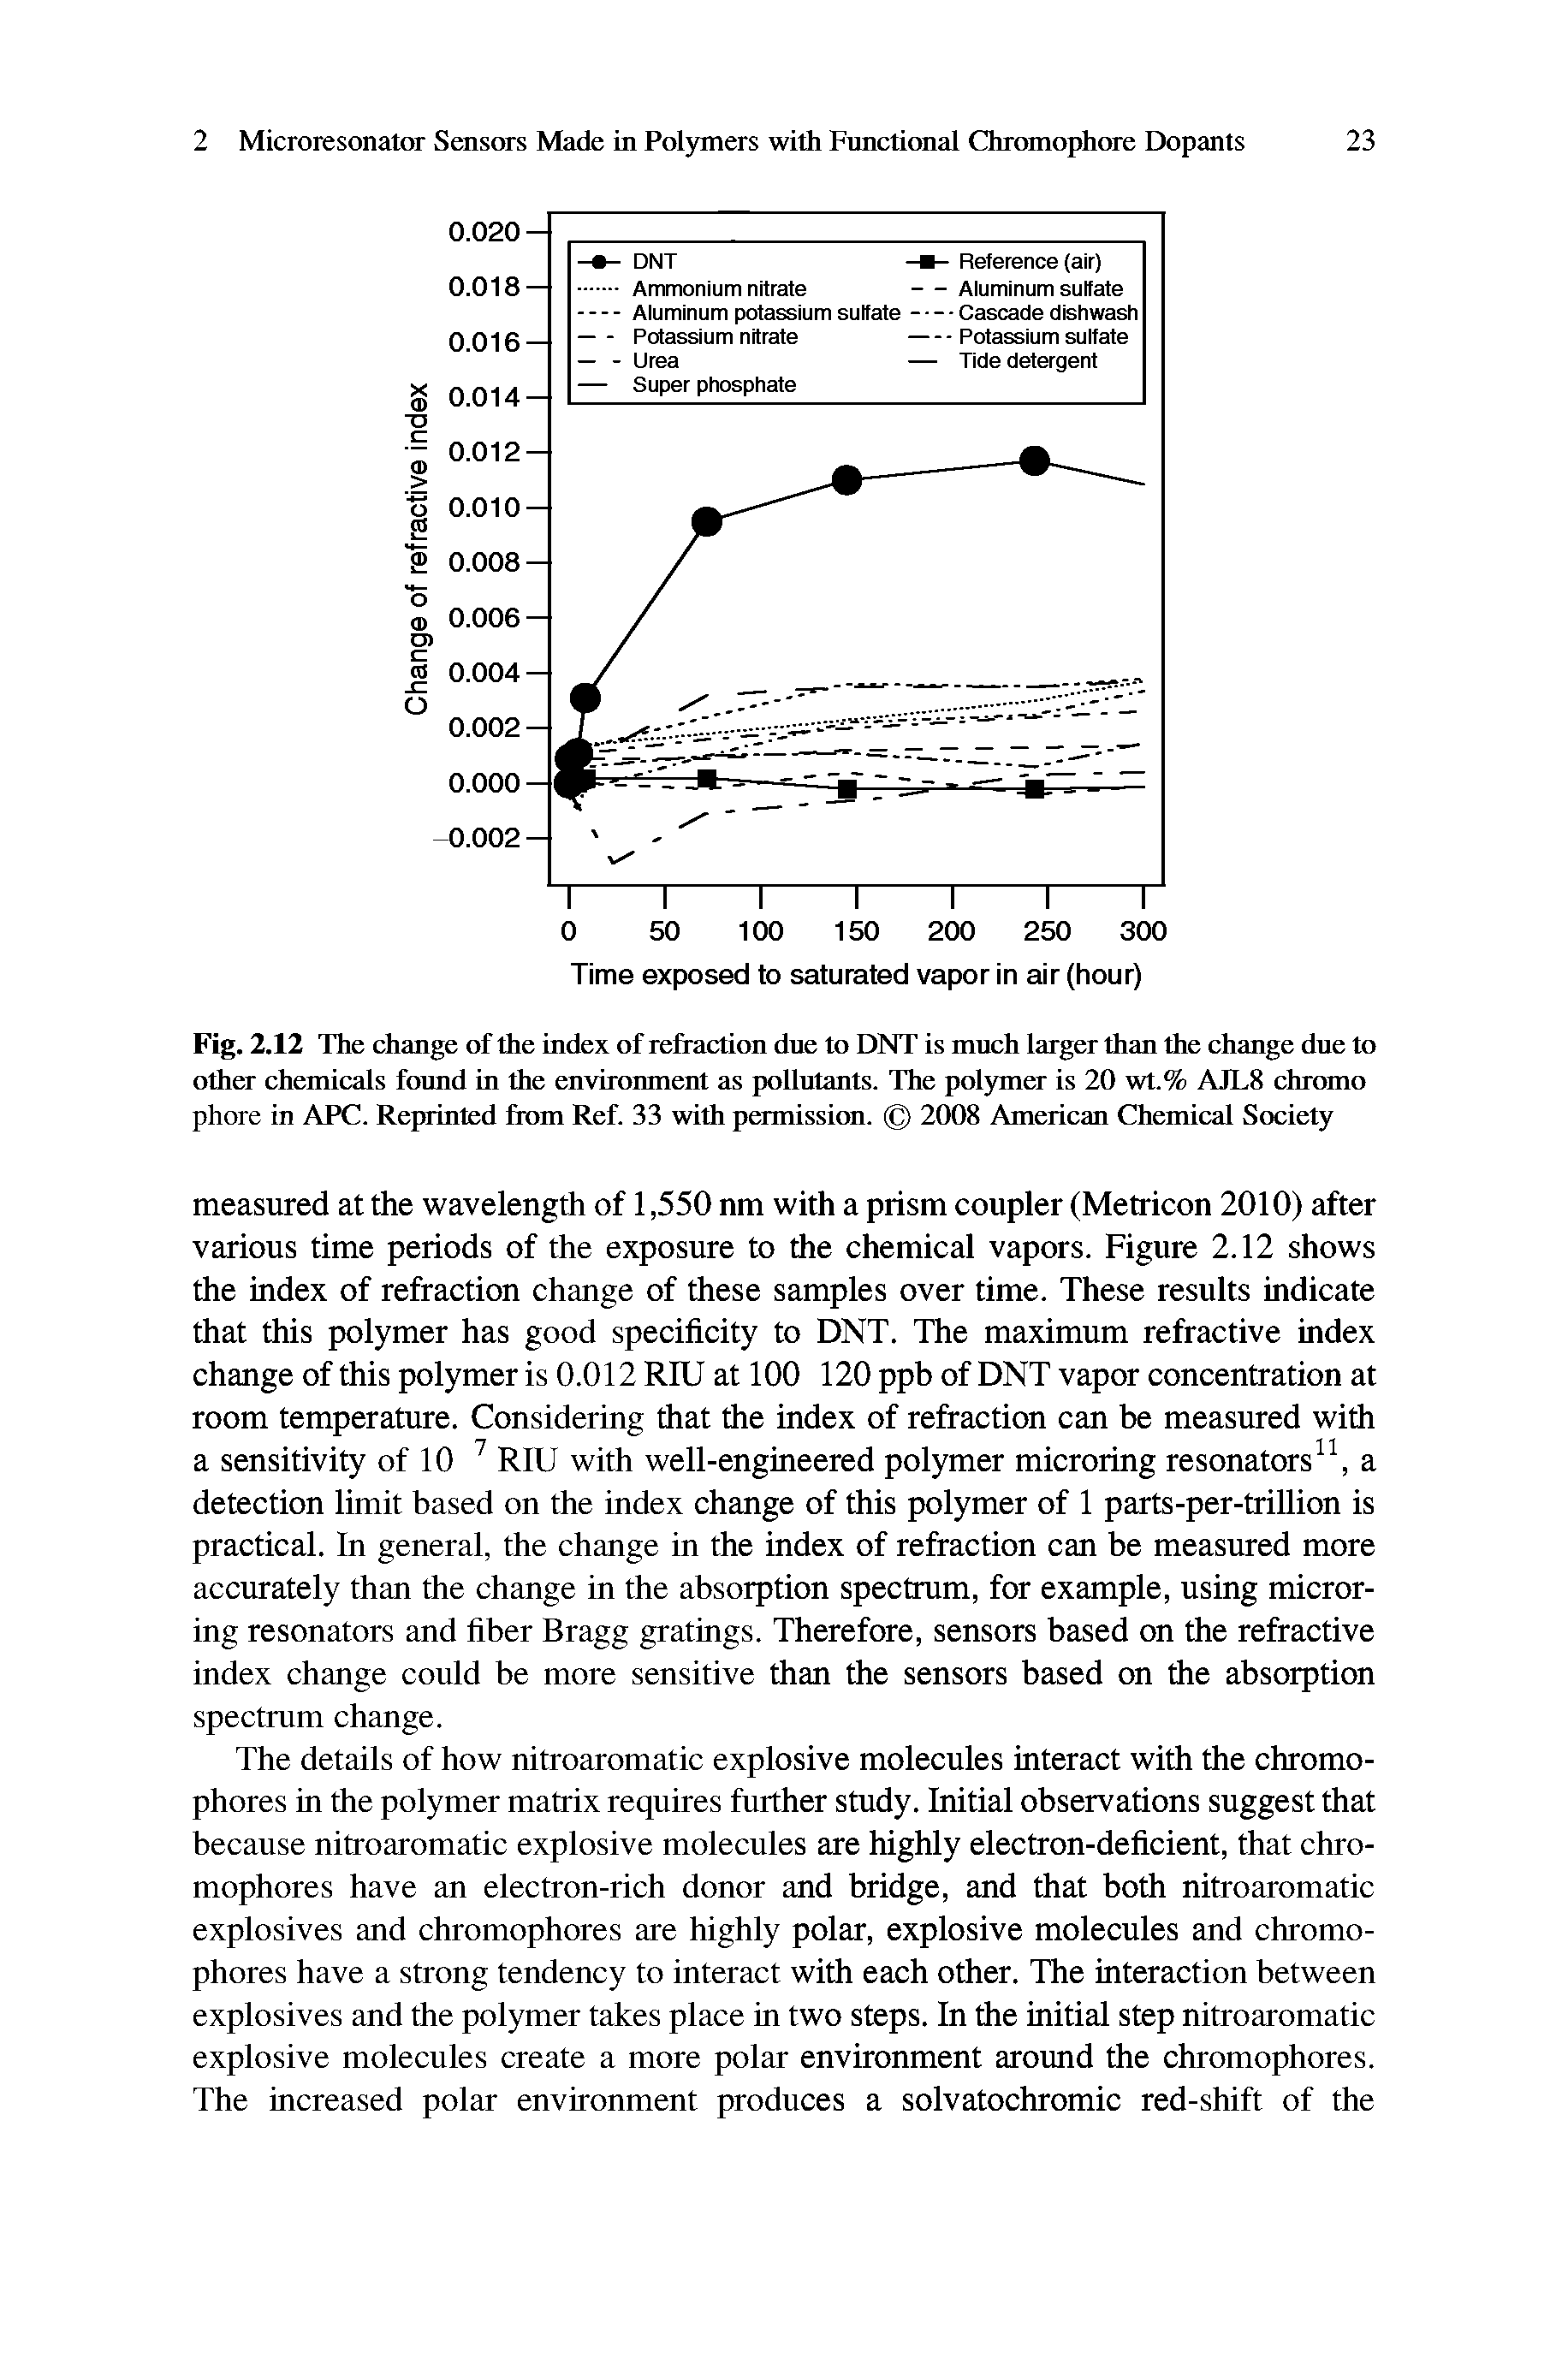 Fig. 2.12 The change of the index of refraction due to DNT is much larger than the change due to other chemicals found in the environment as pollutants. The polymer is 20 wt.% AJL8 chromo phore in APC. Reprinted from Ref. 33 with permission. 2008 American Chemical Society...